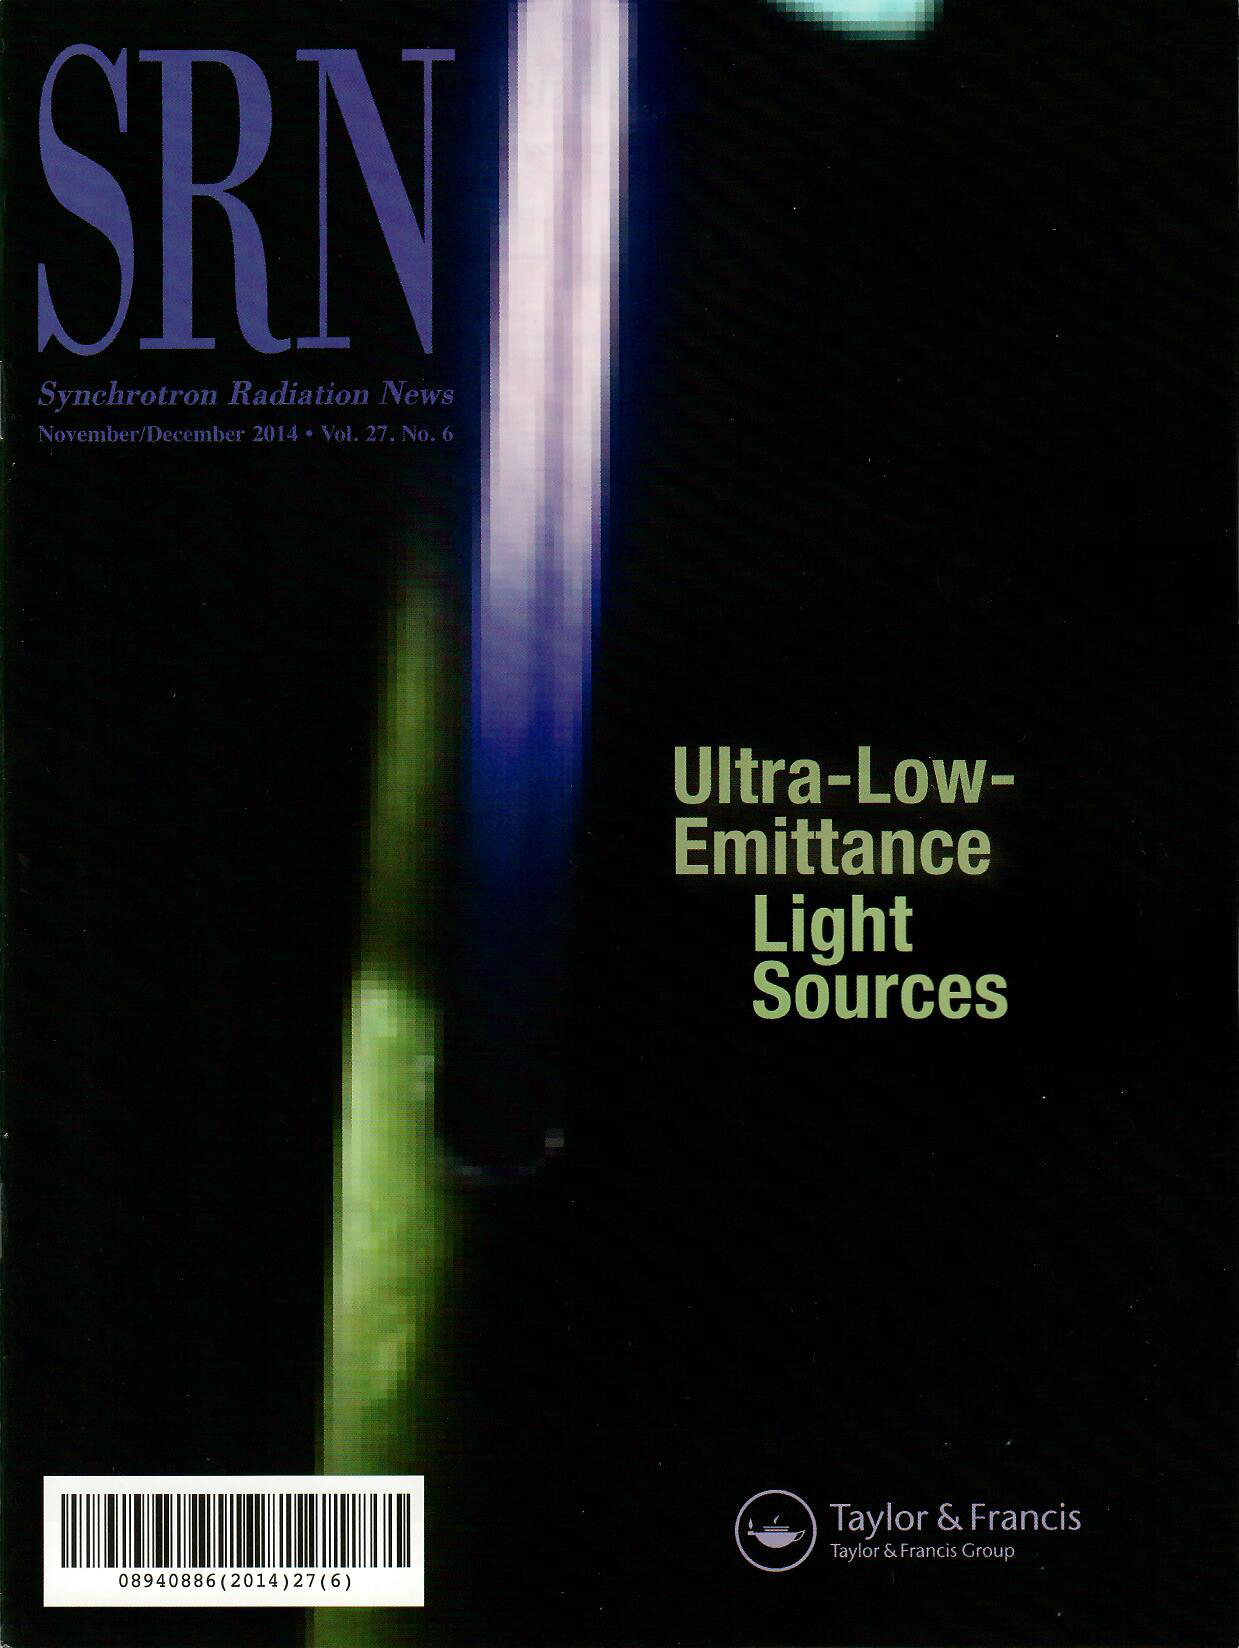 The Chinese High-Energy Photon Source and its R&D Project--SR News